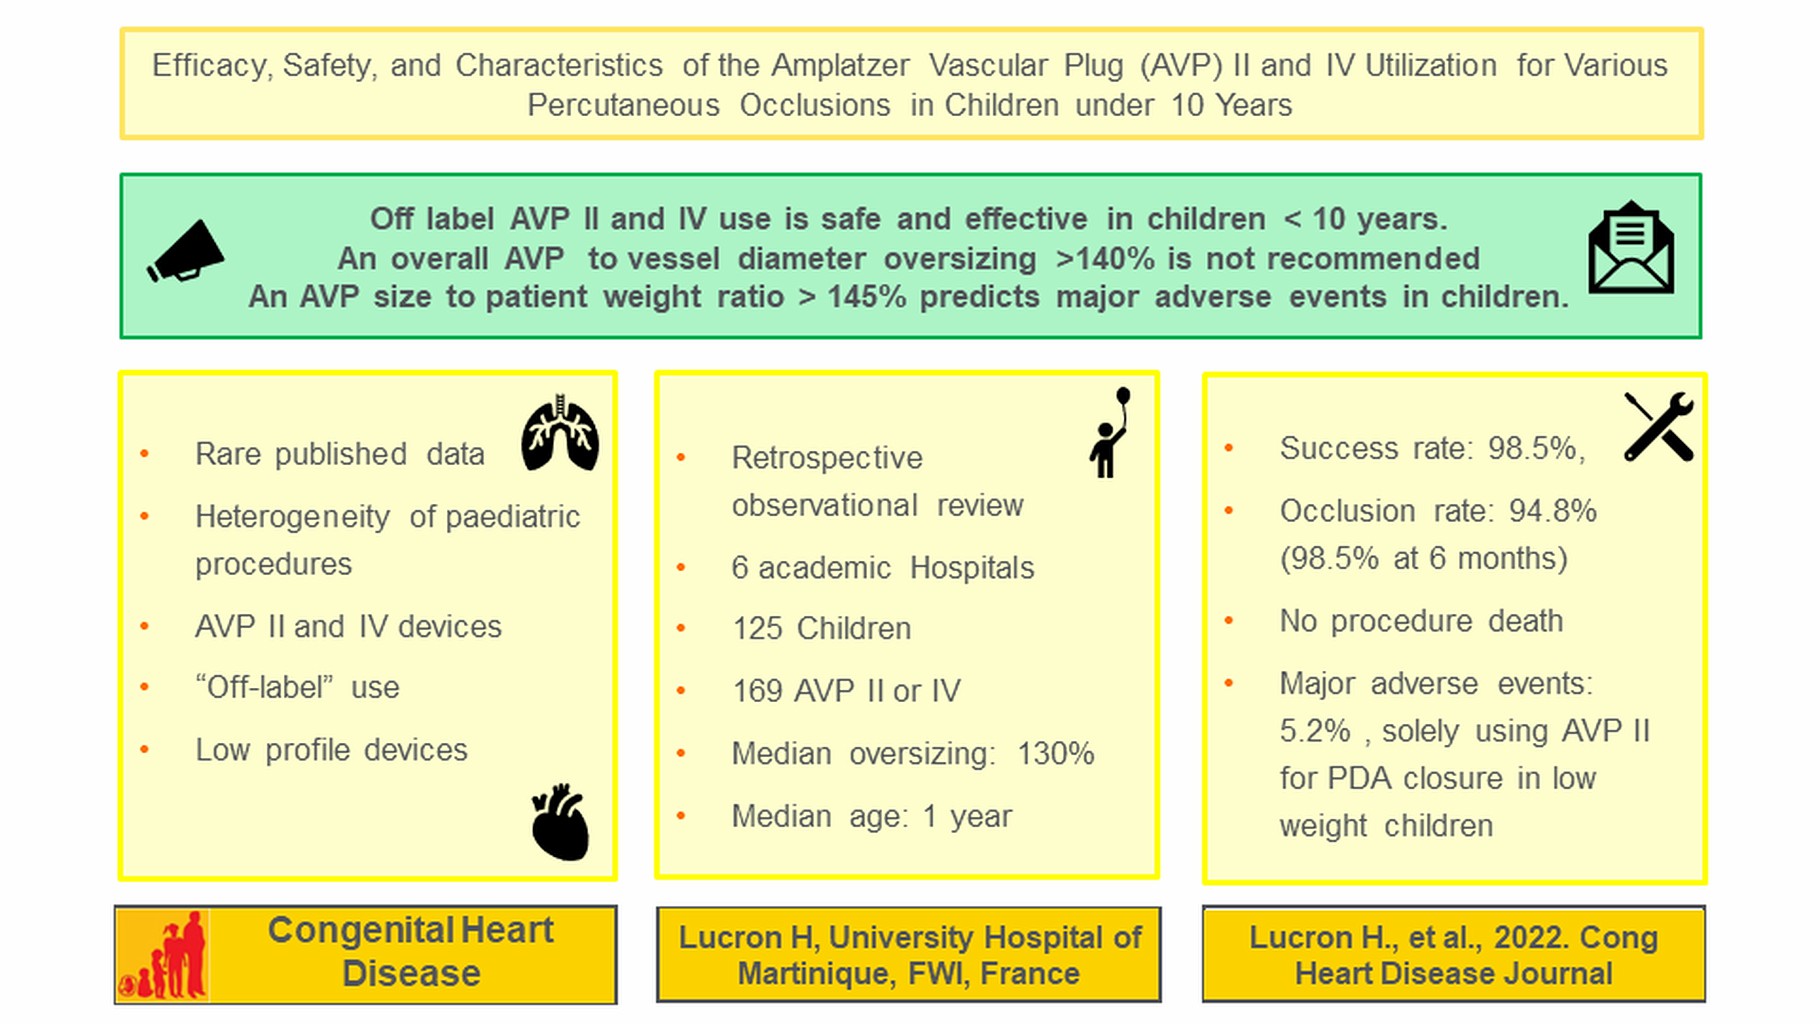 Efficacy, Safety and Characteristics of the Amplatzer Vascular Plug II and IV Utilization for Various Percutaneous Occlusions in Children under 10 Years